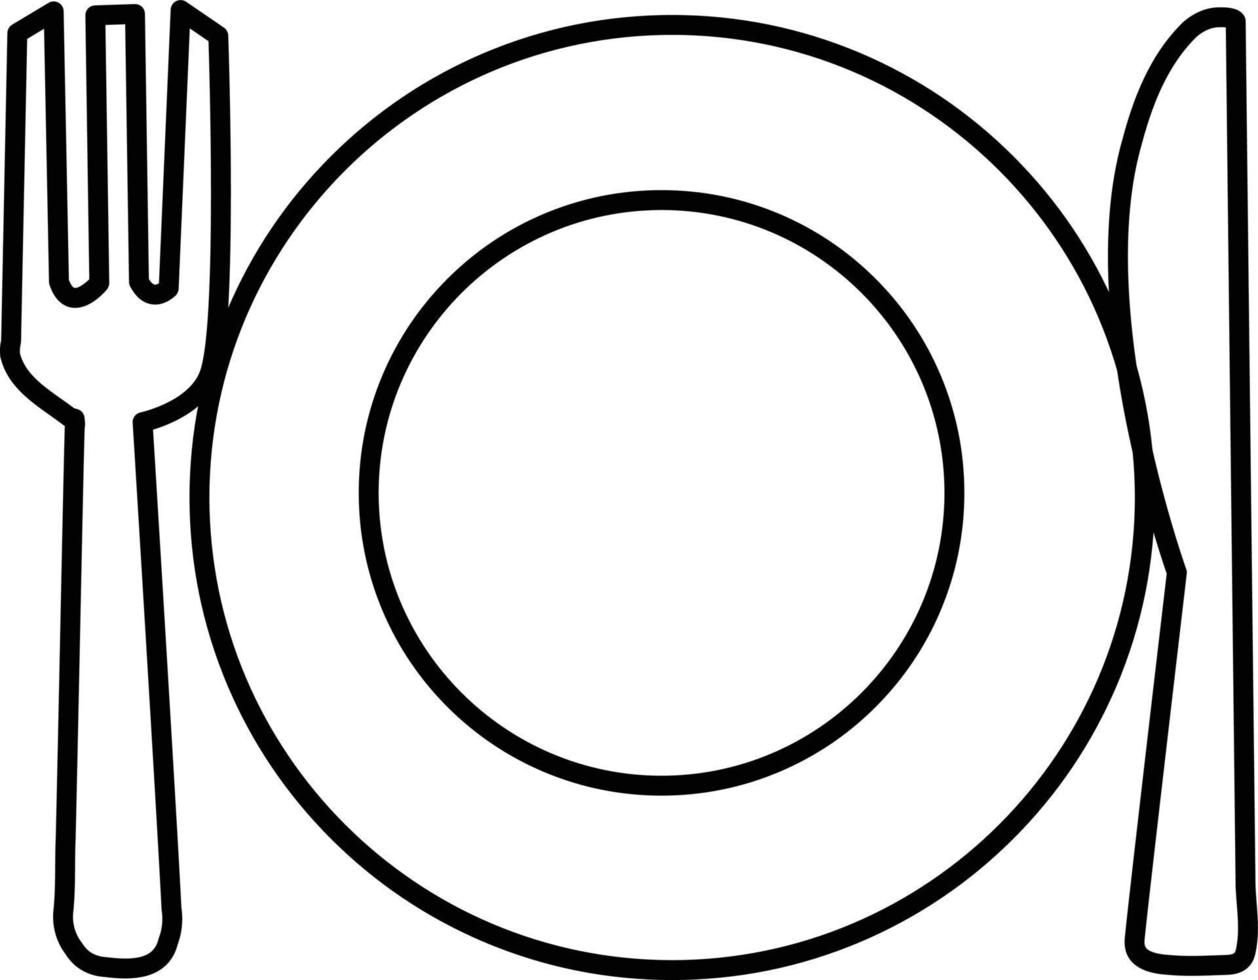 plate, fork and knife line icon on white background. dinner dishes sign. cutlery symbol. vector